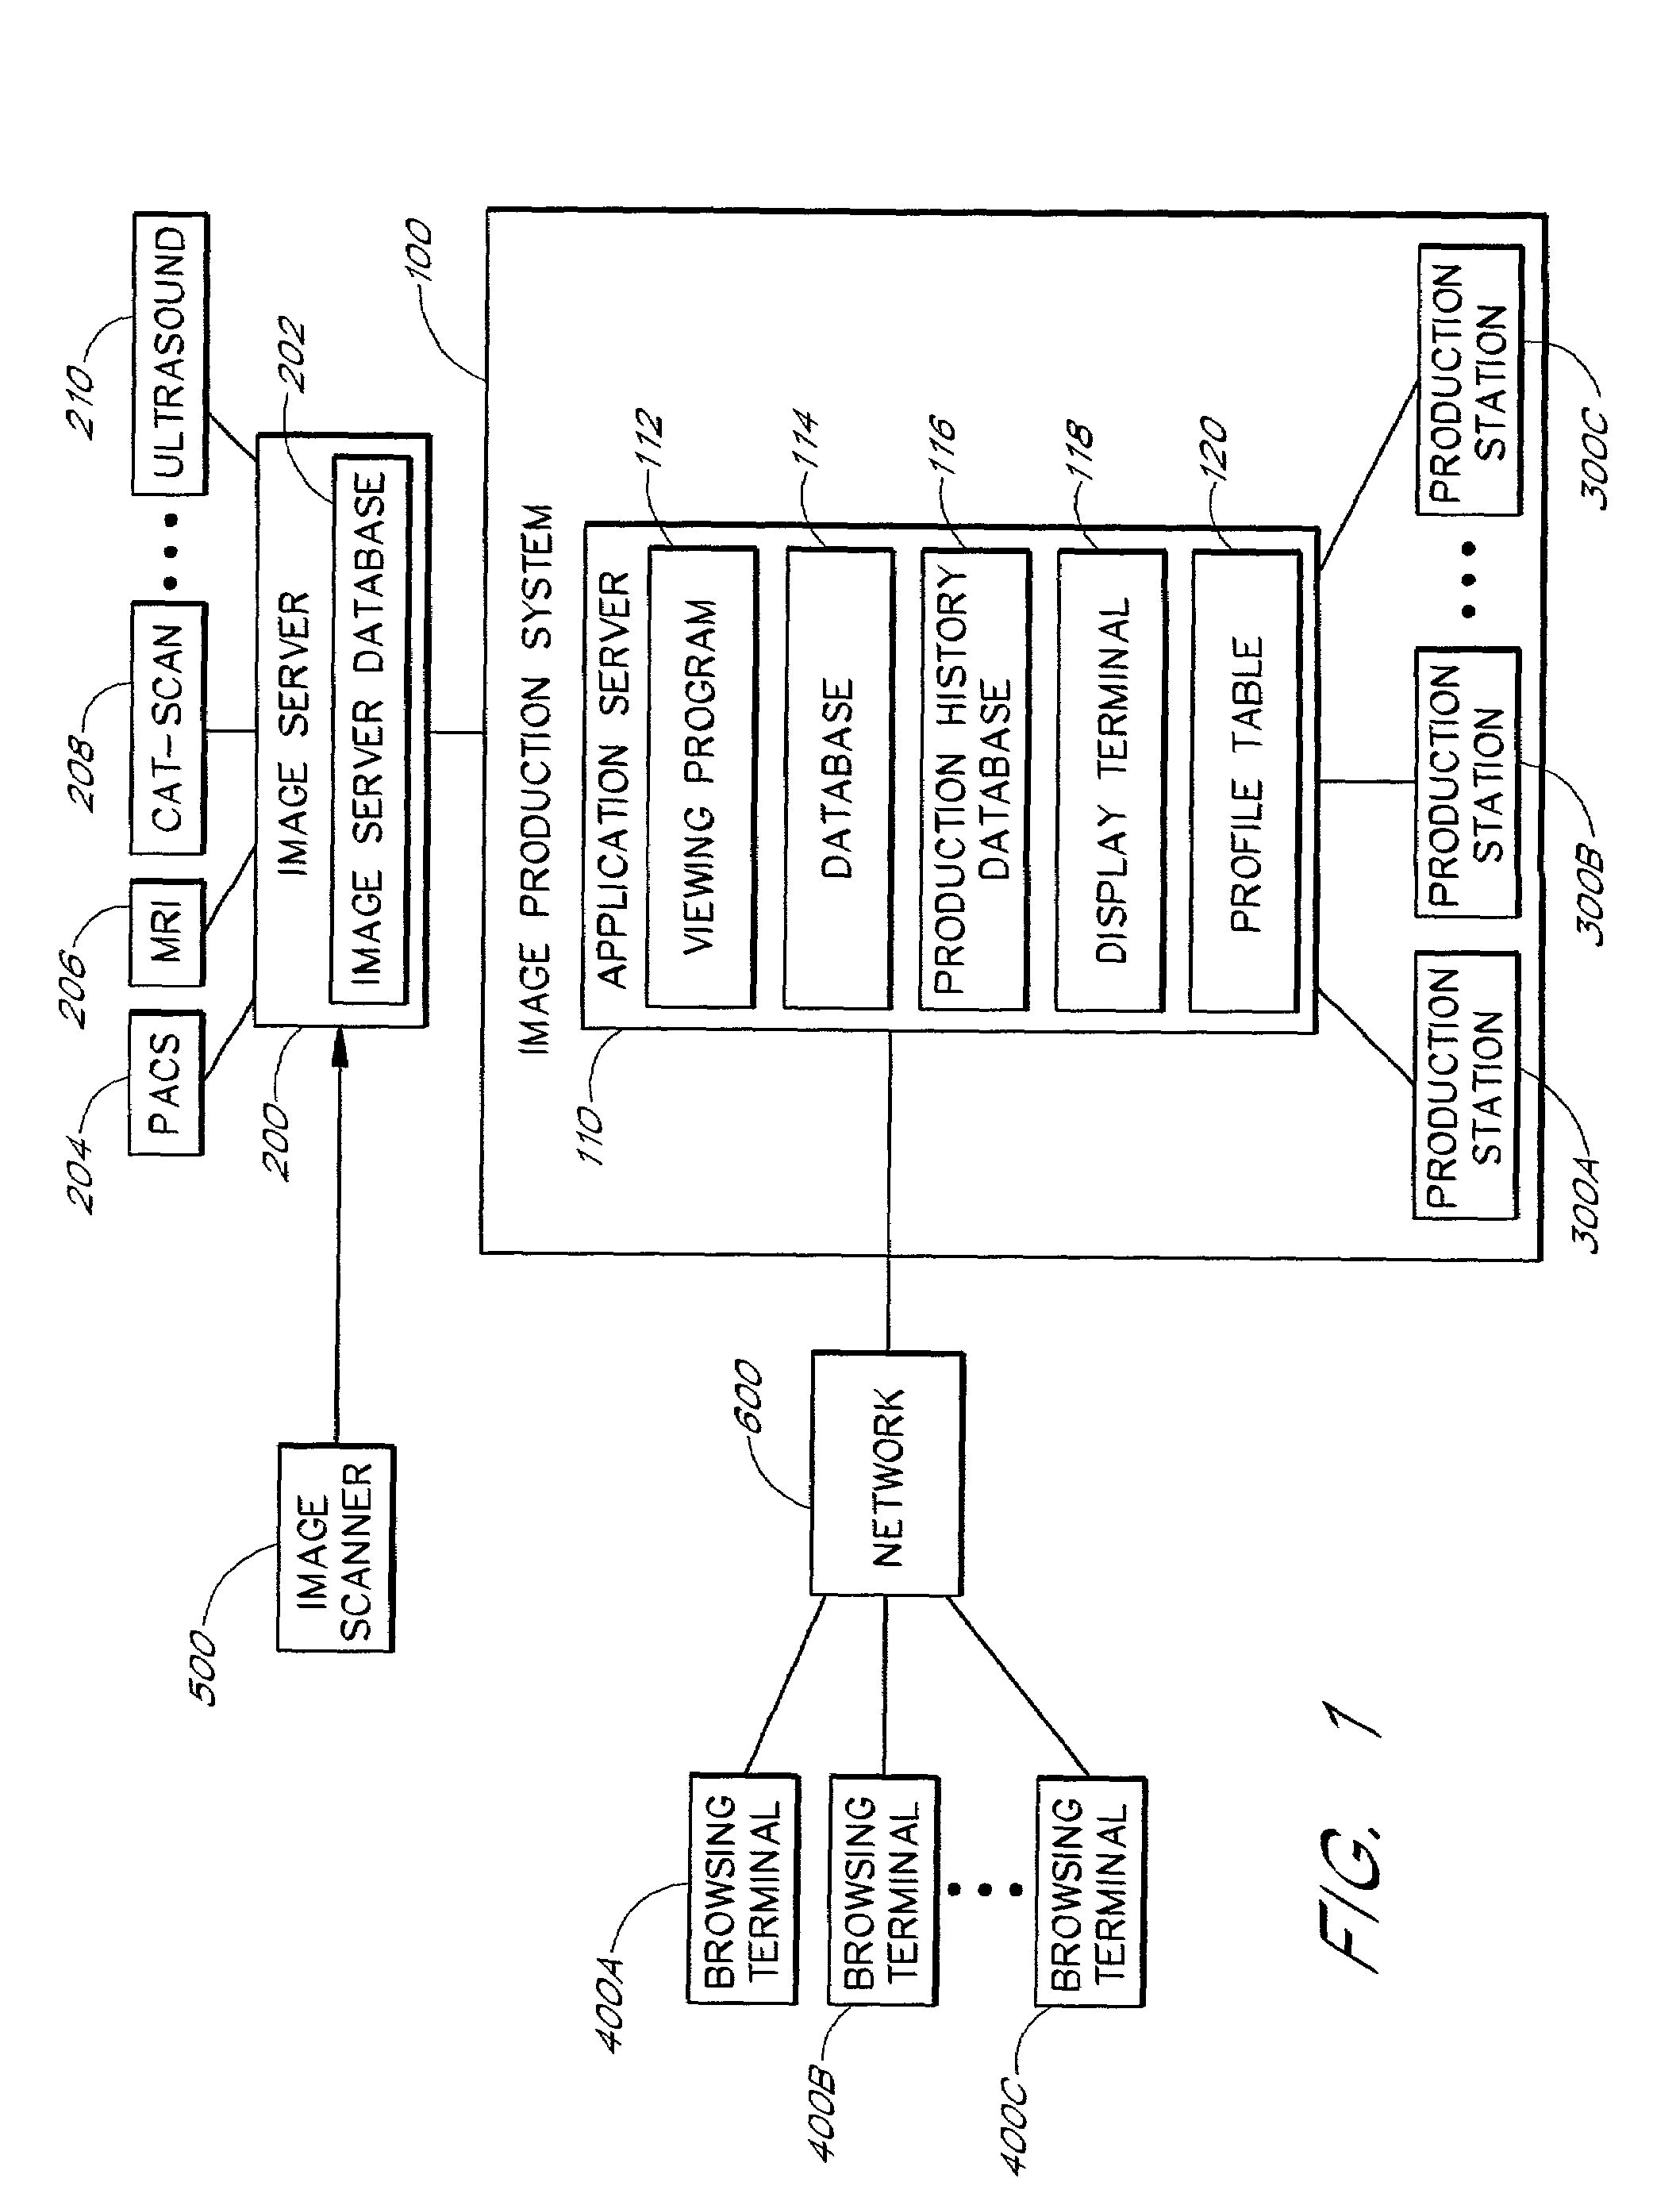 System and method for producing medical image data onto portable digital recording media